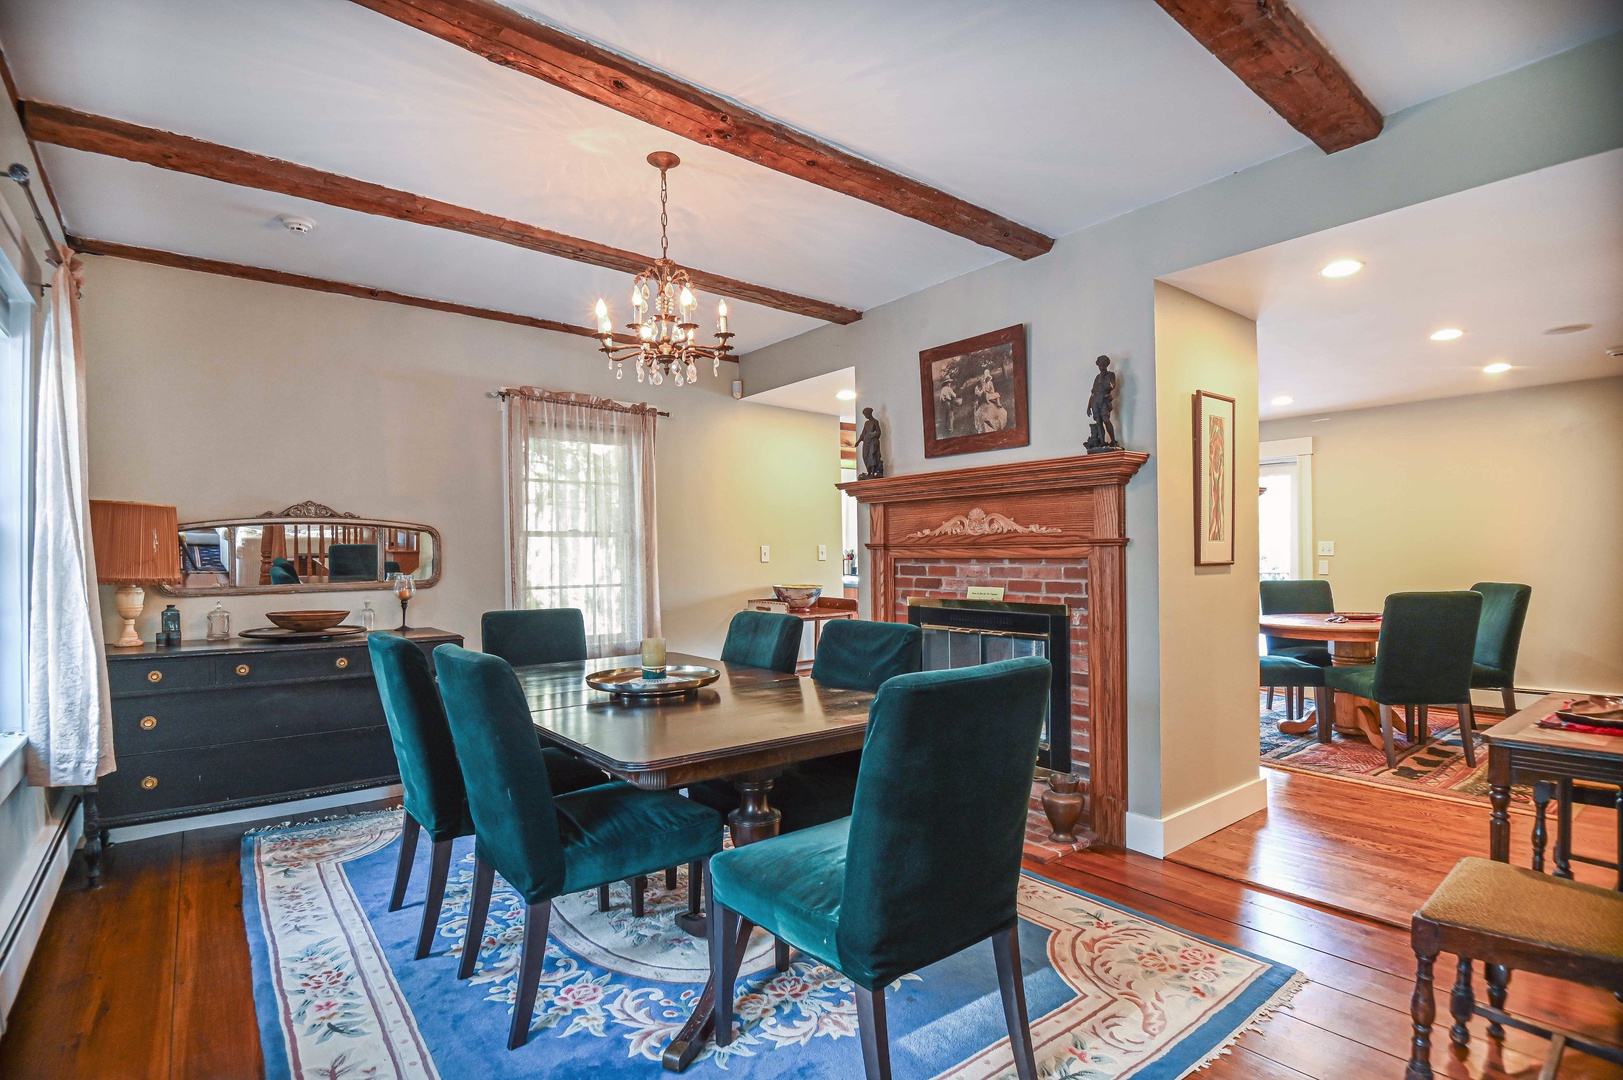 Gather for elegant meals together in the dining room, offering seating for 6